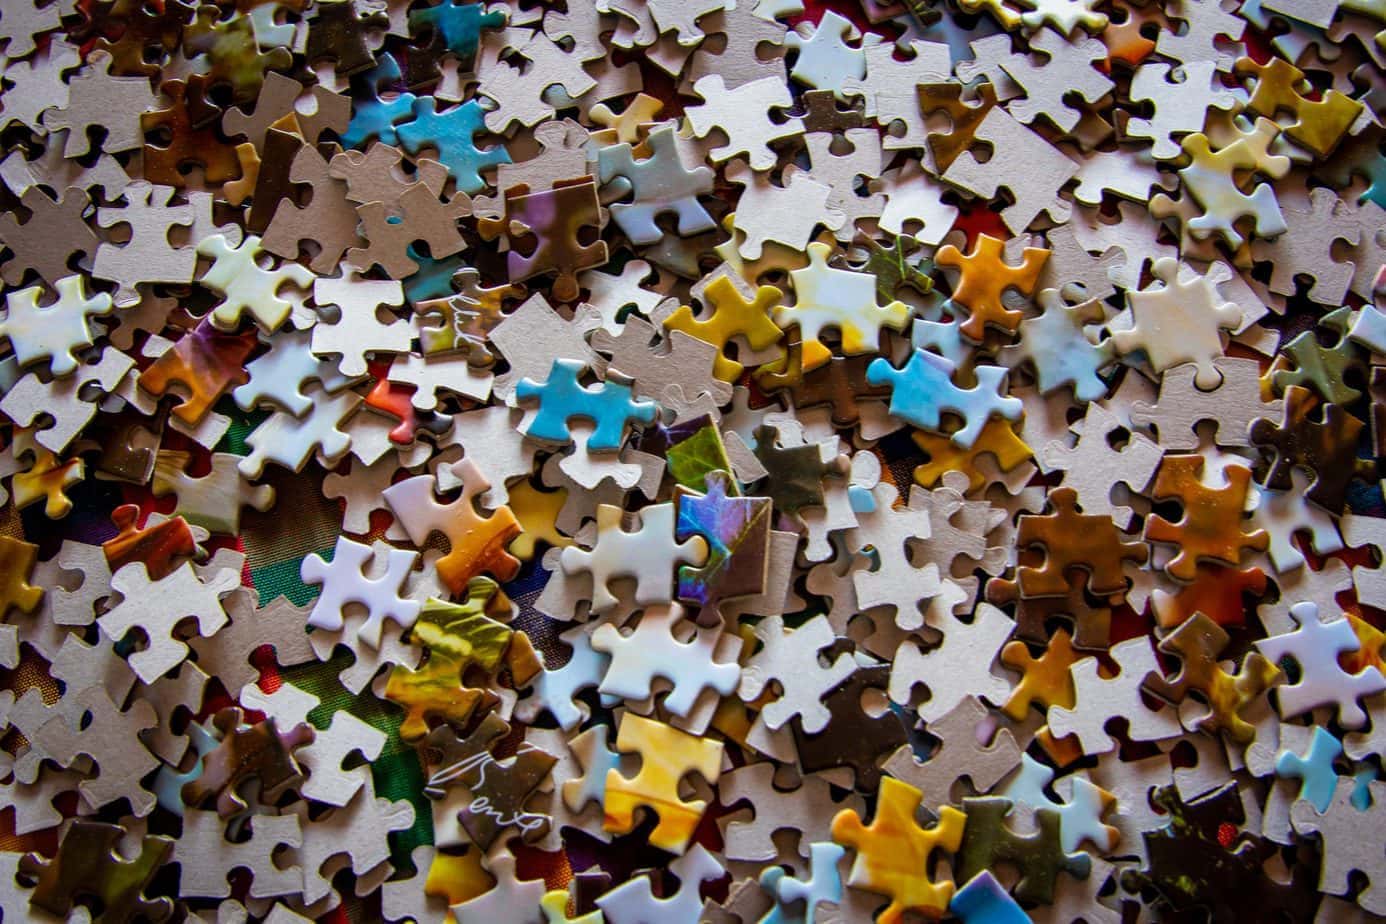 What should a baby’s first puzzle look like?